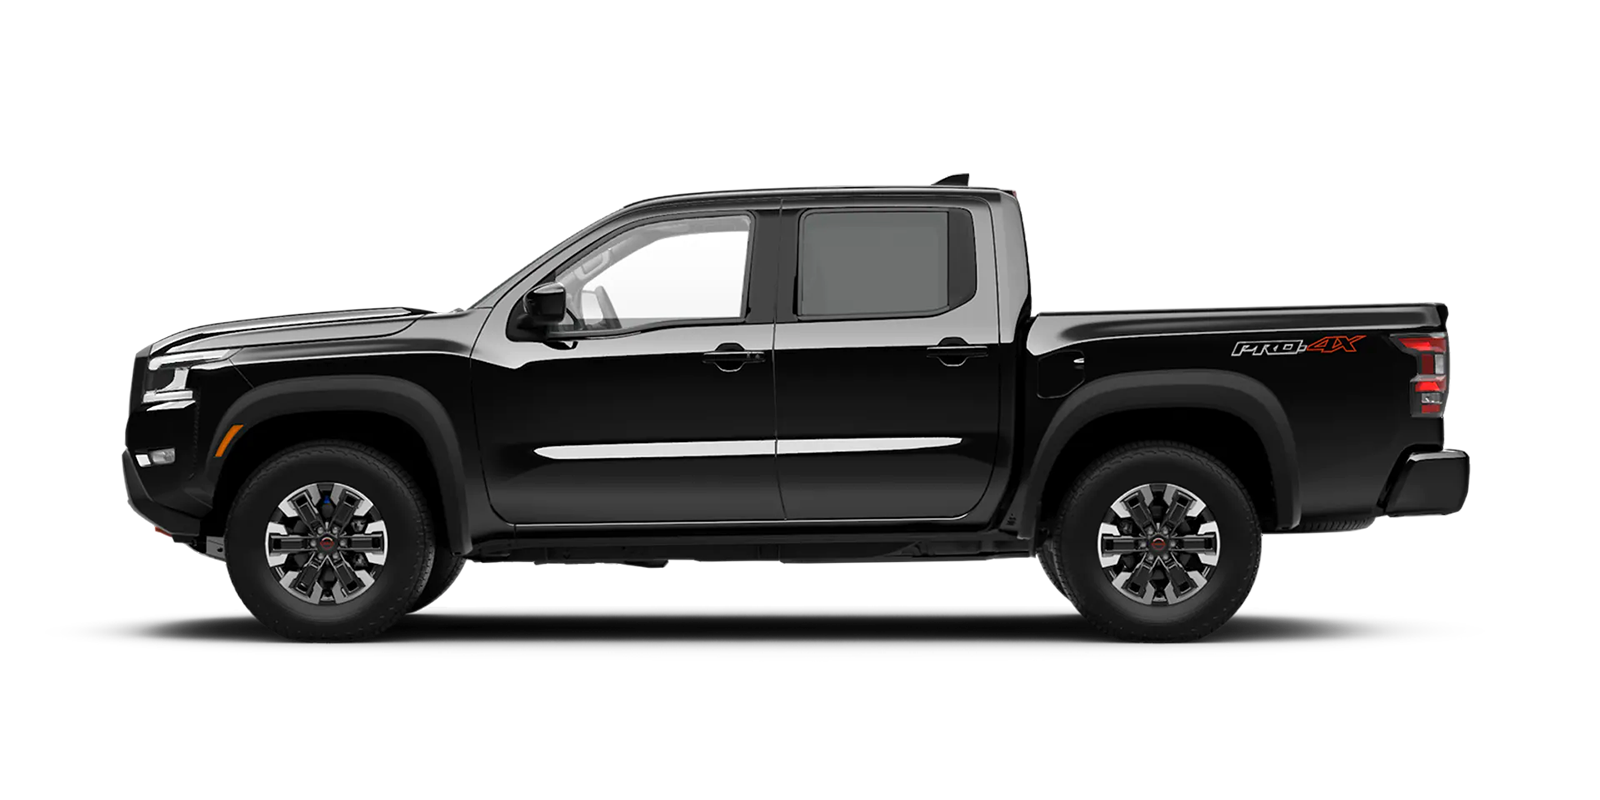 2022 Frontier Crew Cab Pro-4X 4x4 in Super Black | Fort Collins Nissan in Fort Collins CO